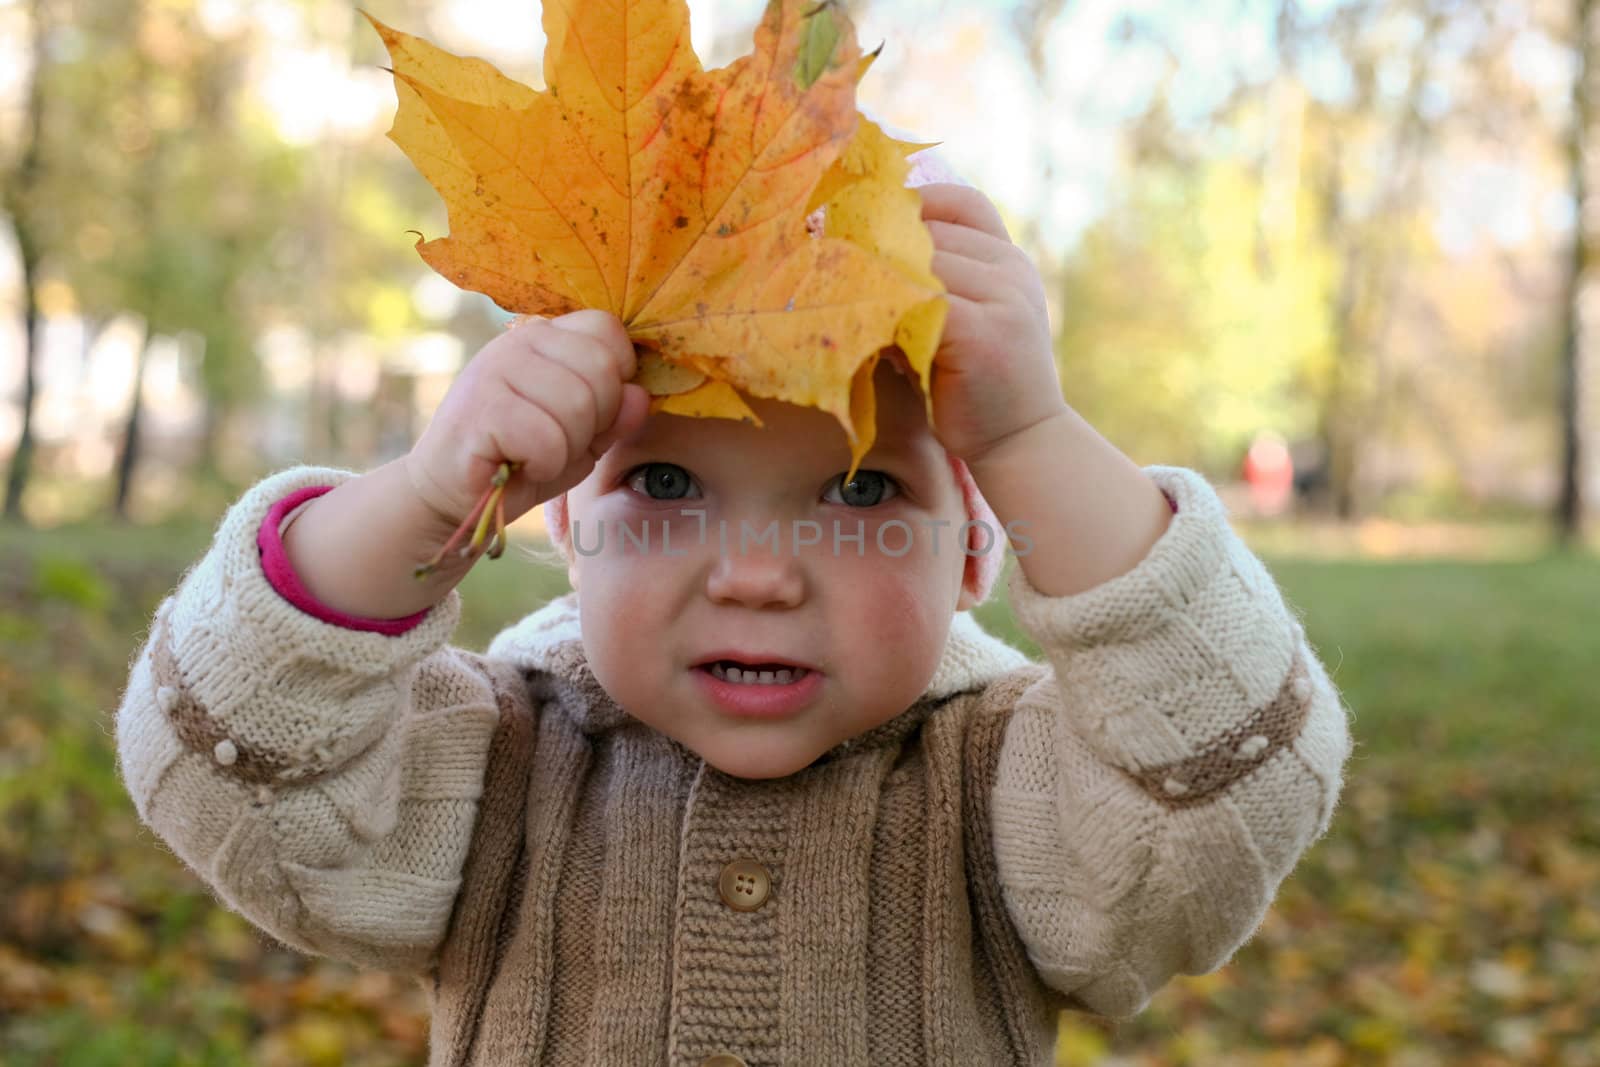 An image of baby in autumn park